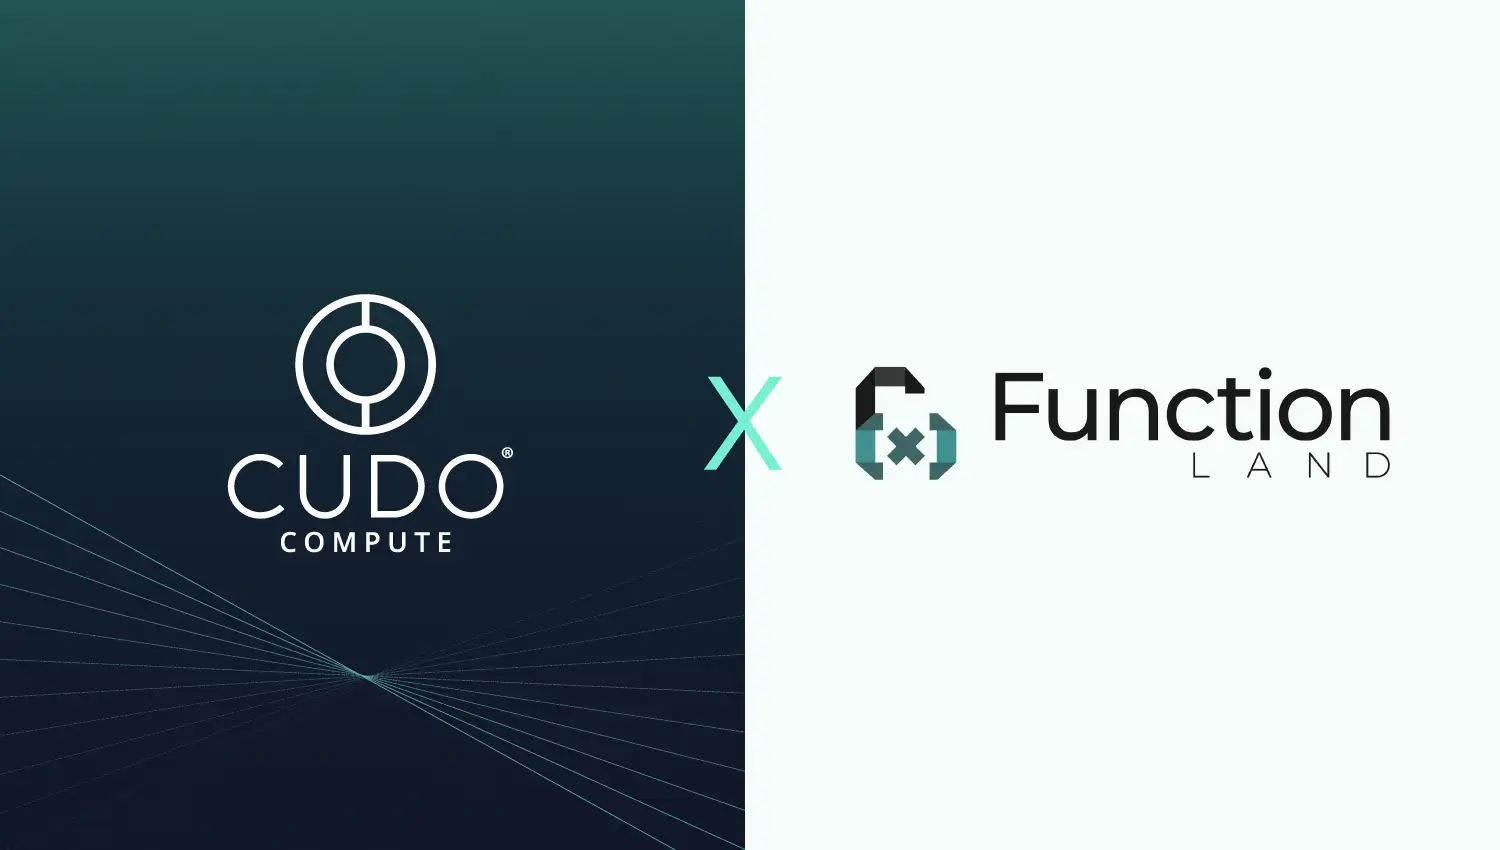 Cudos partners with Functionland to support decentralised cloud solutions cover photo